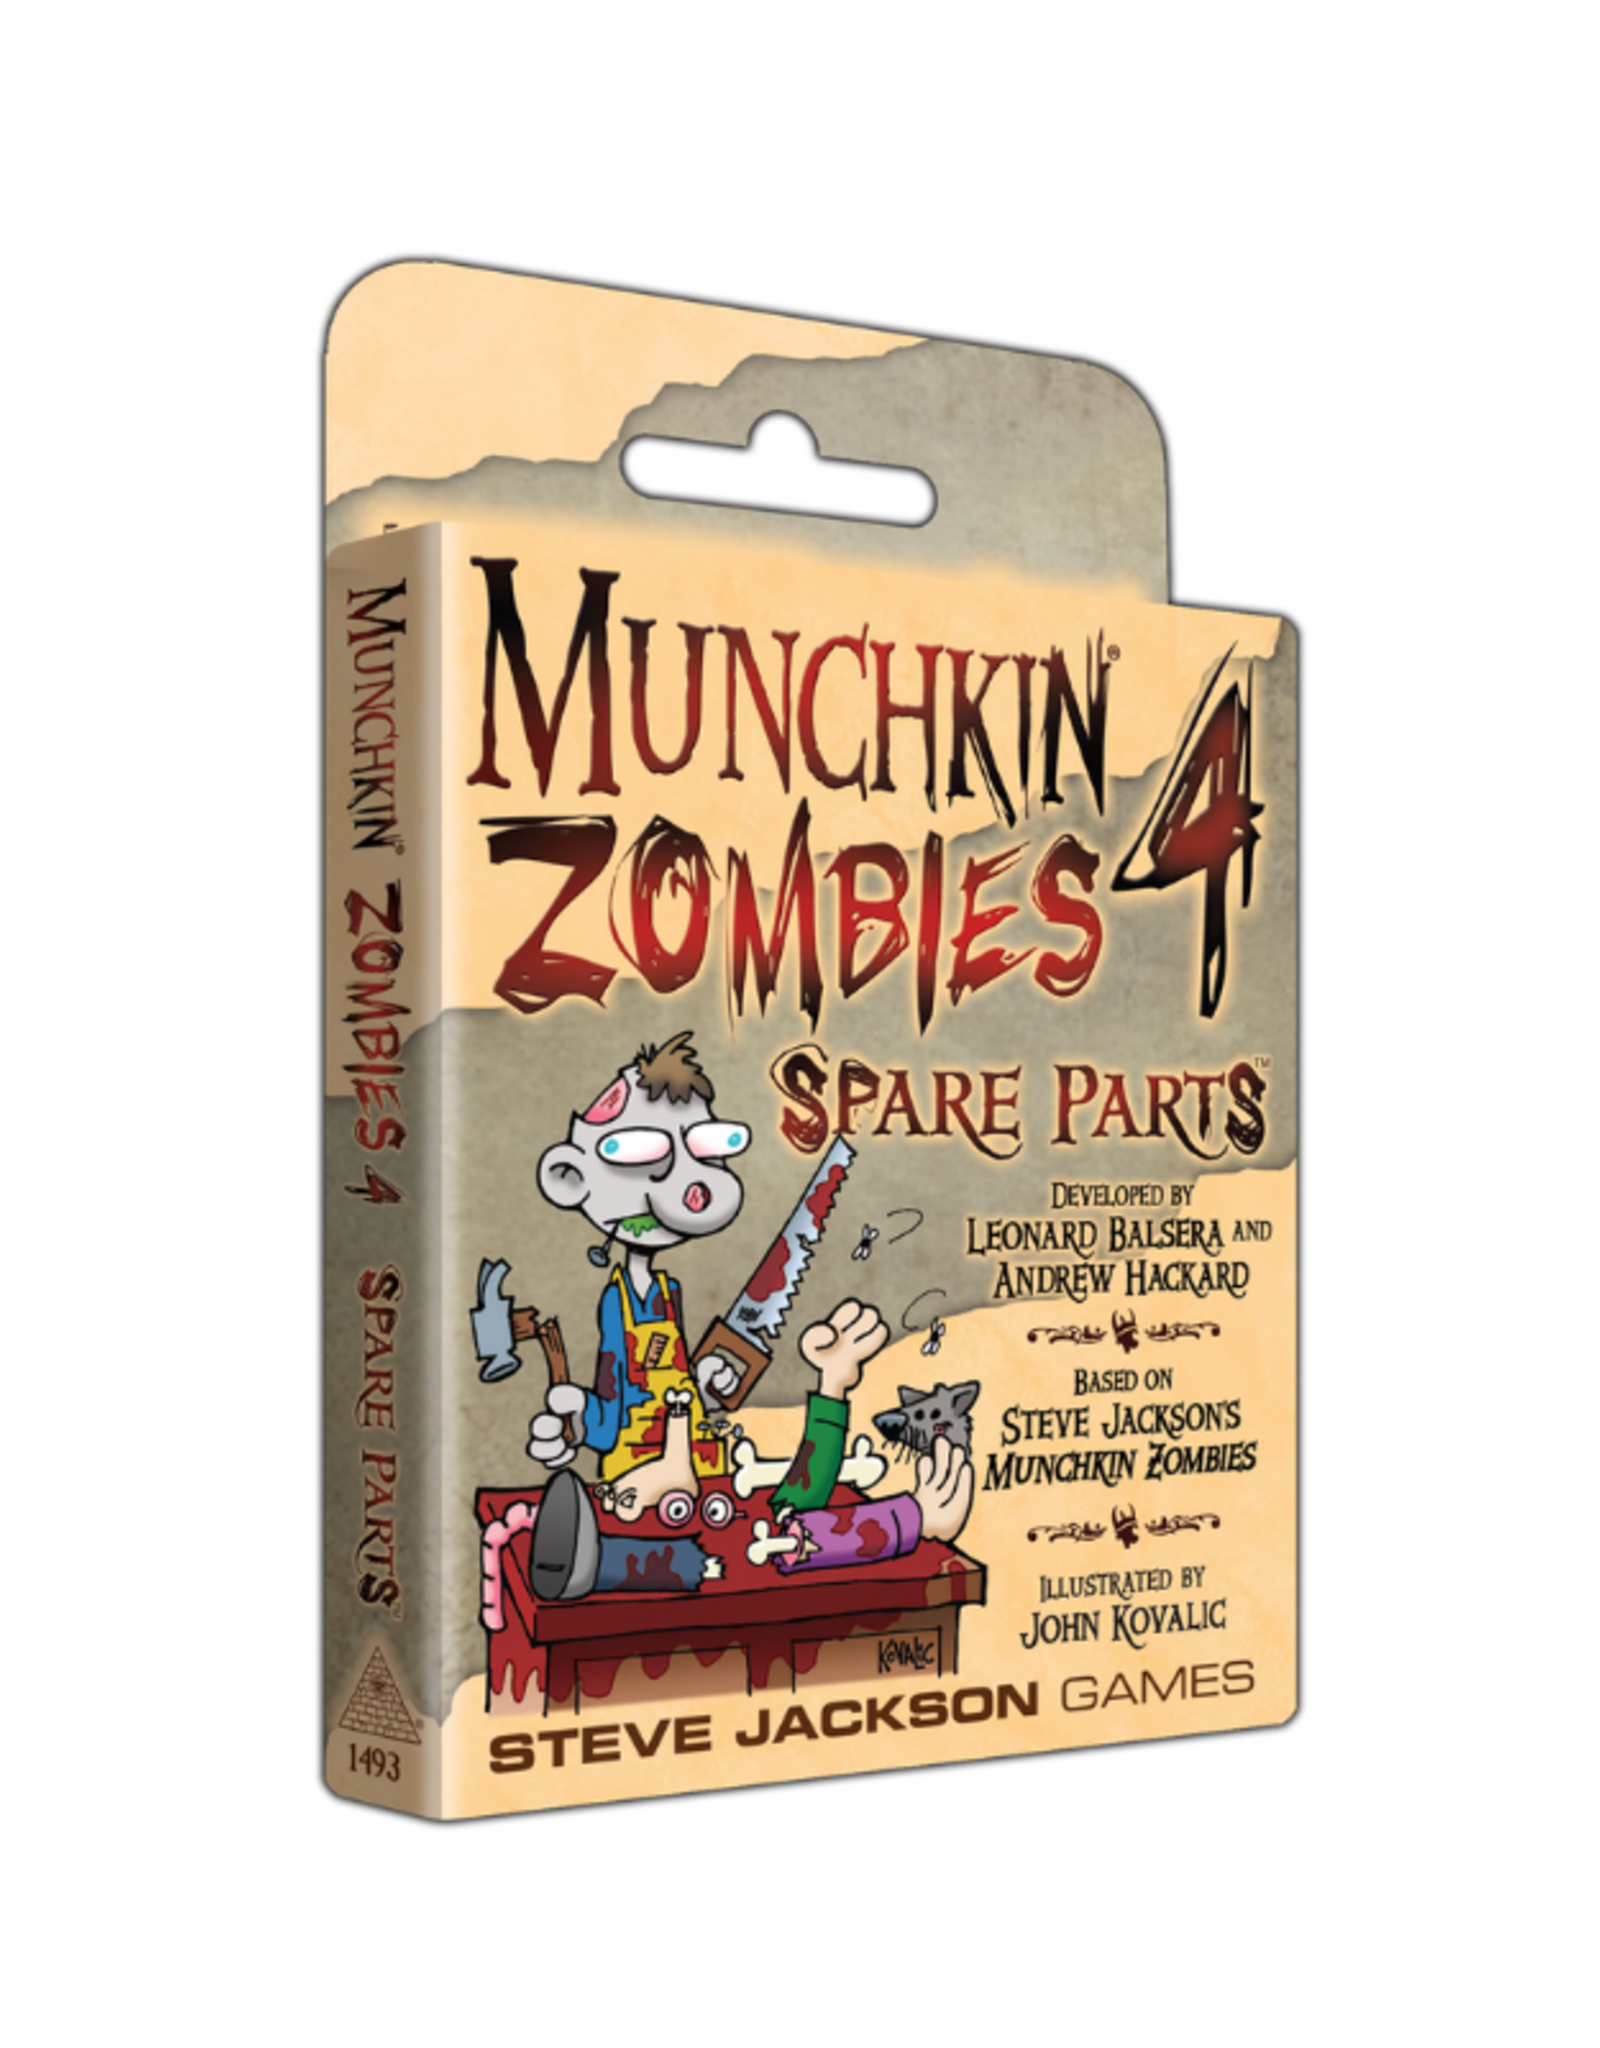 Munchkin Zombies 4 (Spare Parts)